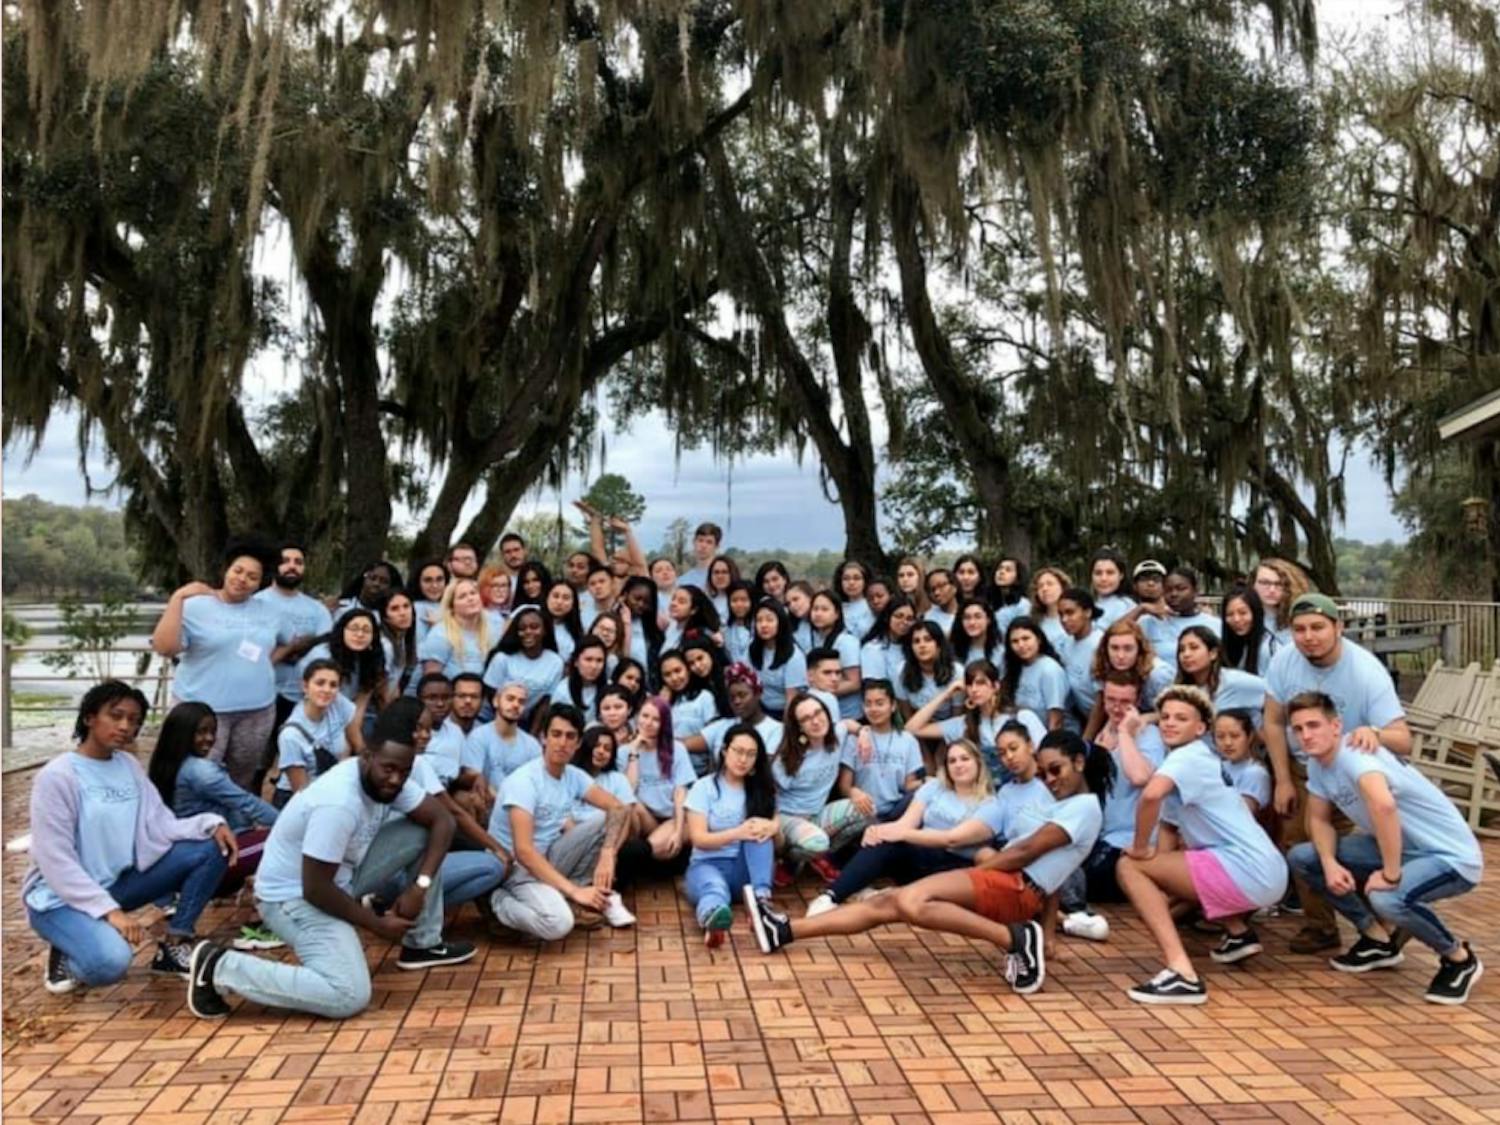 Emma Sanchez, a 19-year-old UF international studies sophomore, attended the fourth weekend of Gatorship in Spring 2019.